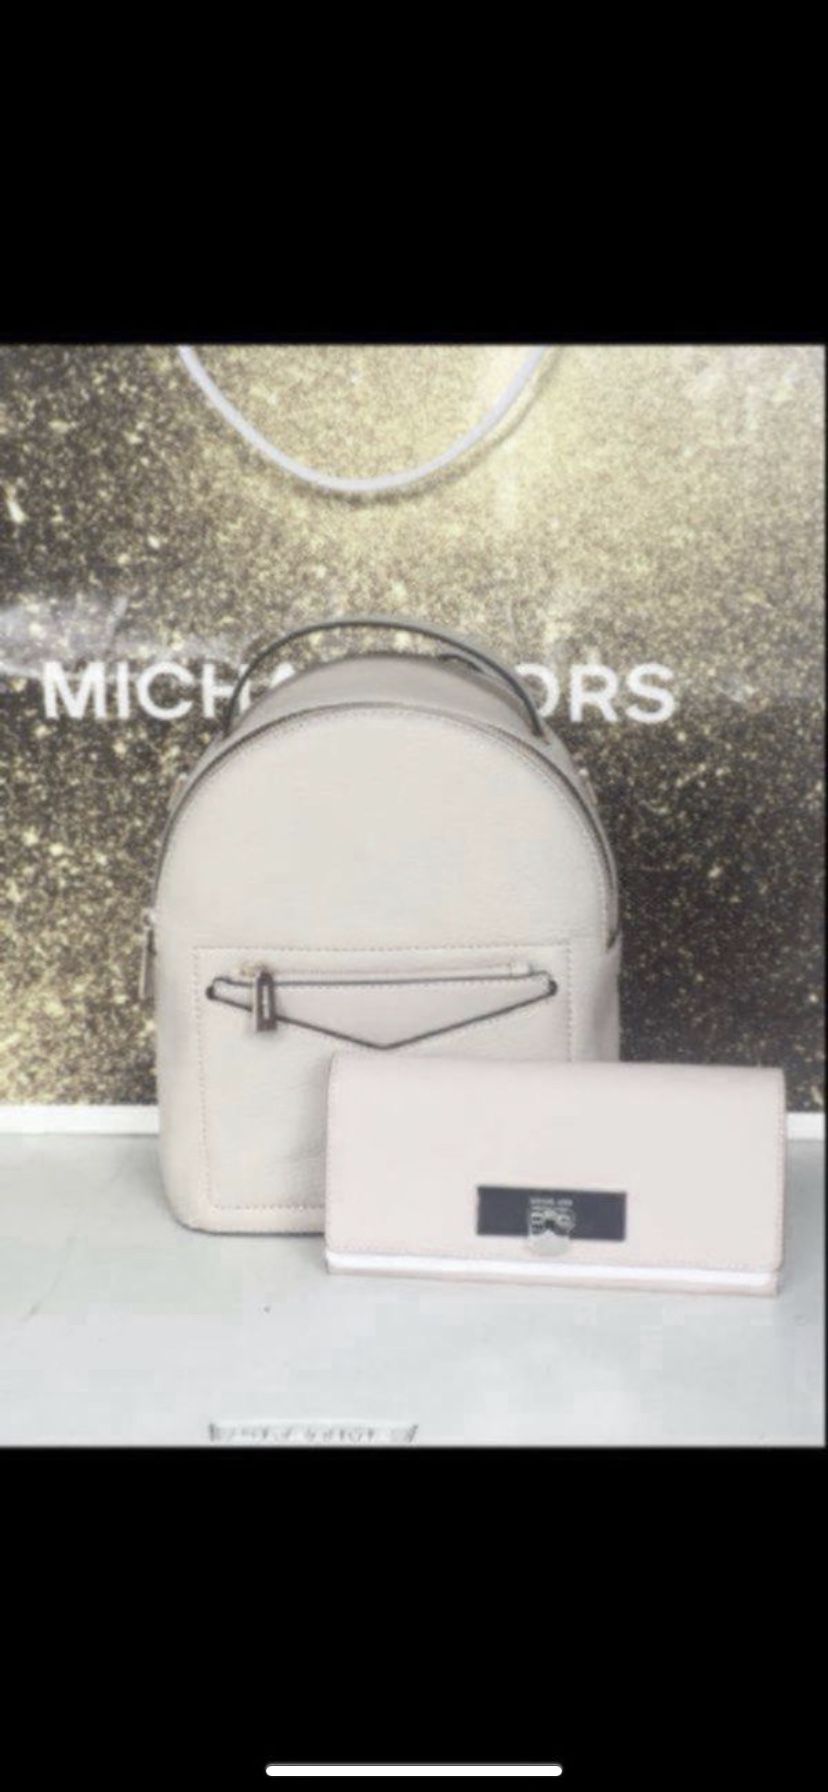 Michael KORS Set 🌹🌷🌹🌷🌹🌷💕 MICHAEL KORS small backpack and large size wallet New with tags attach Serious buyers only please Pick up only Low offe